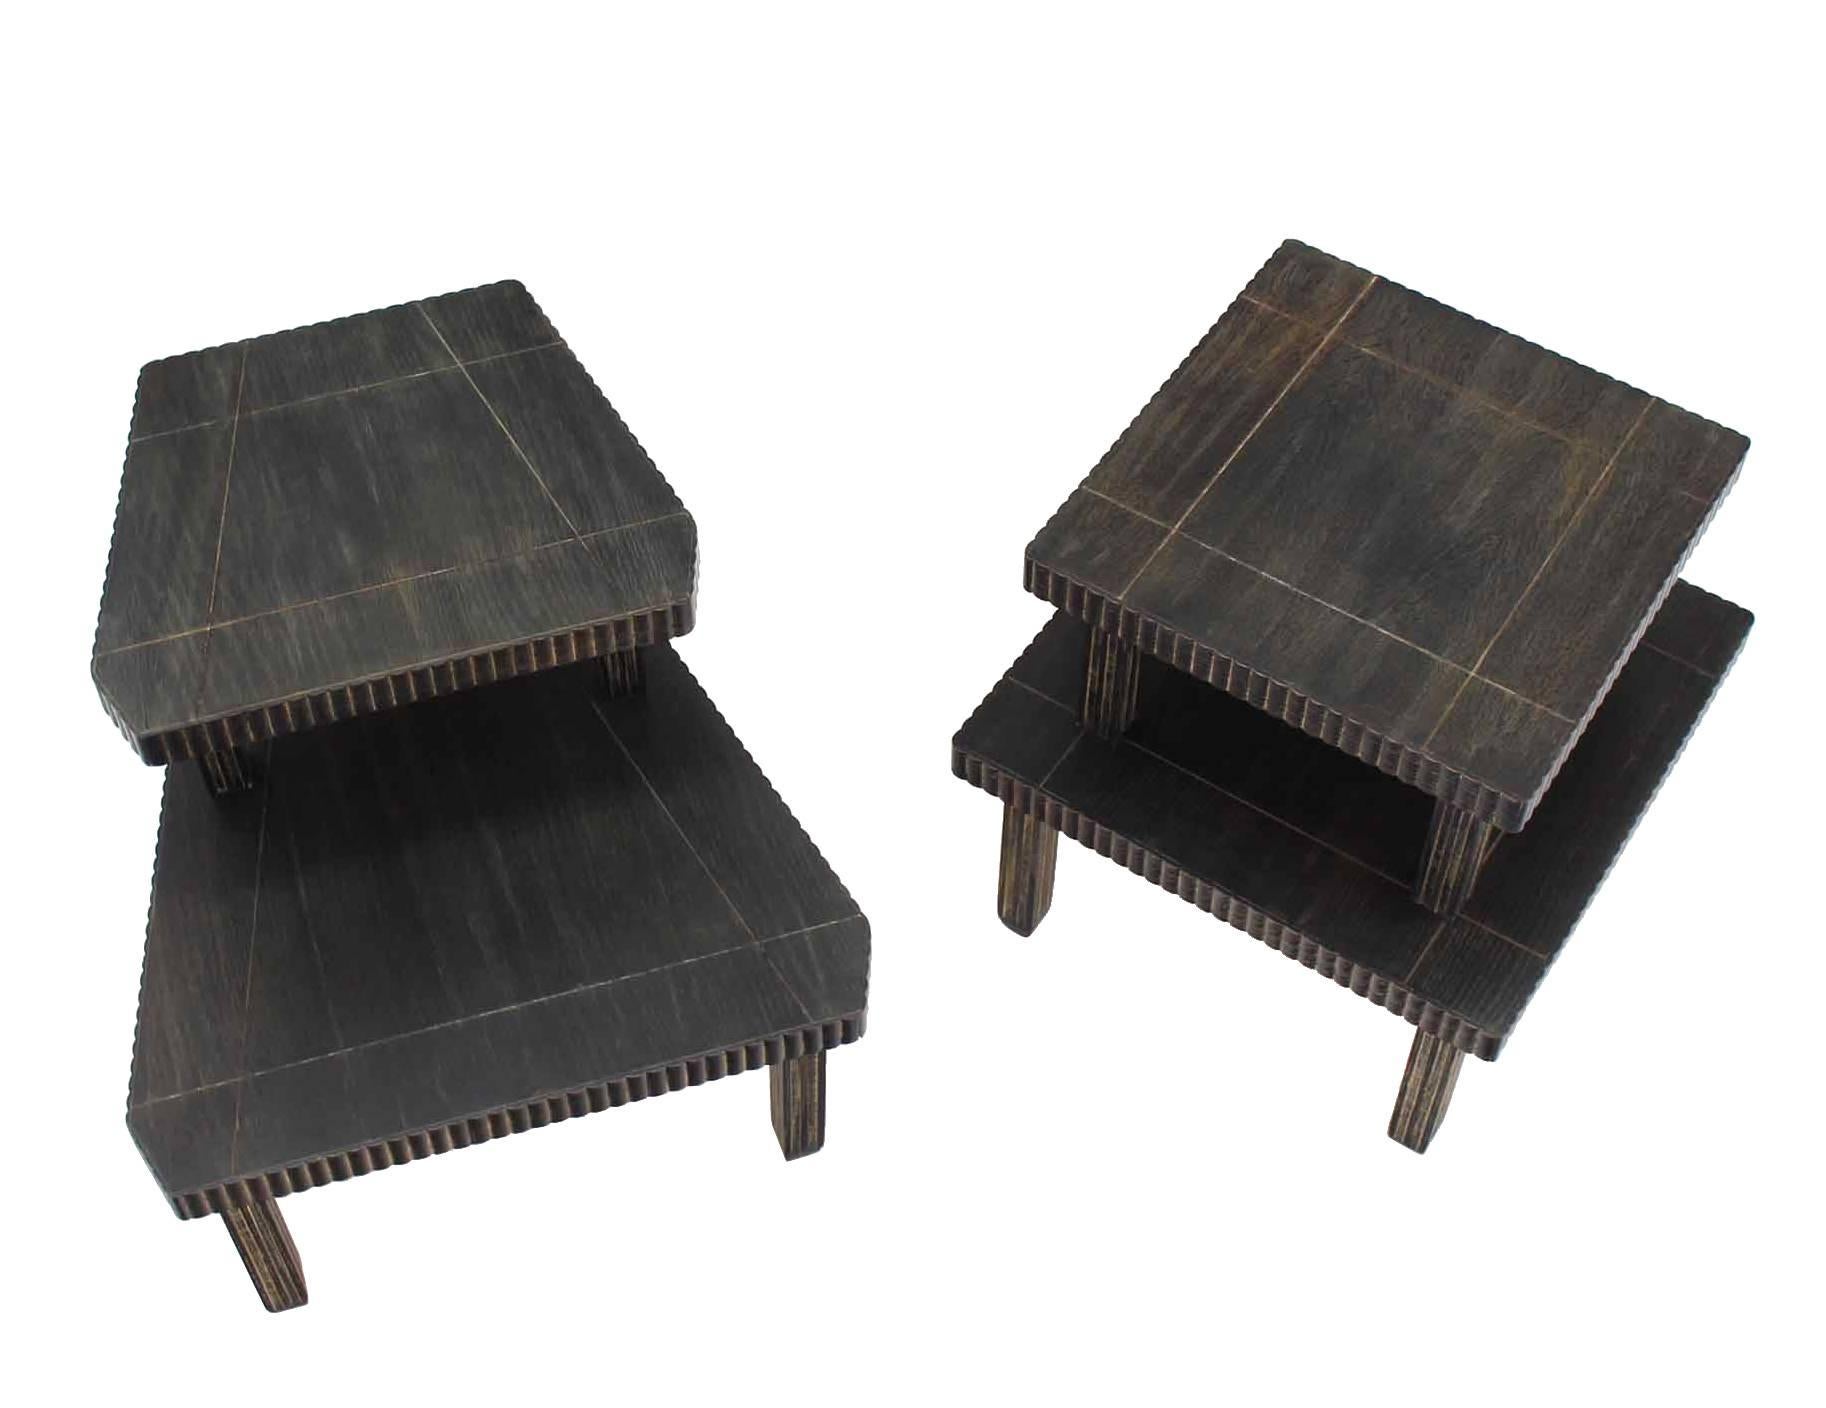 Nice Mid-Century Modern cerused finish step or end tables. 24 x 24 x 26 dimensions for the second table.